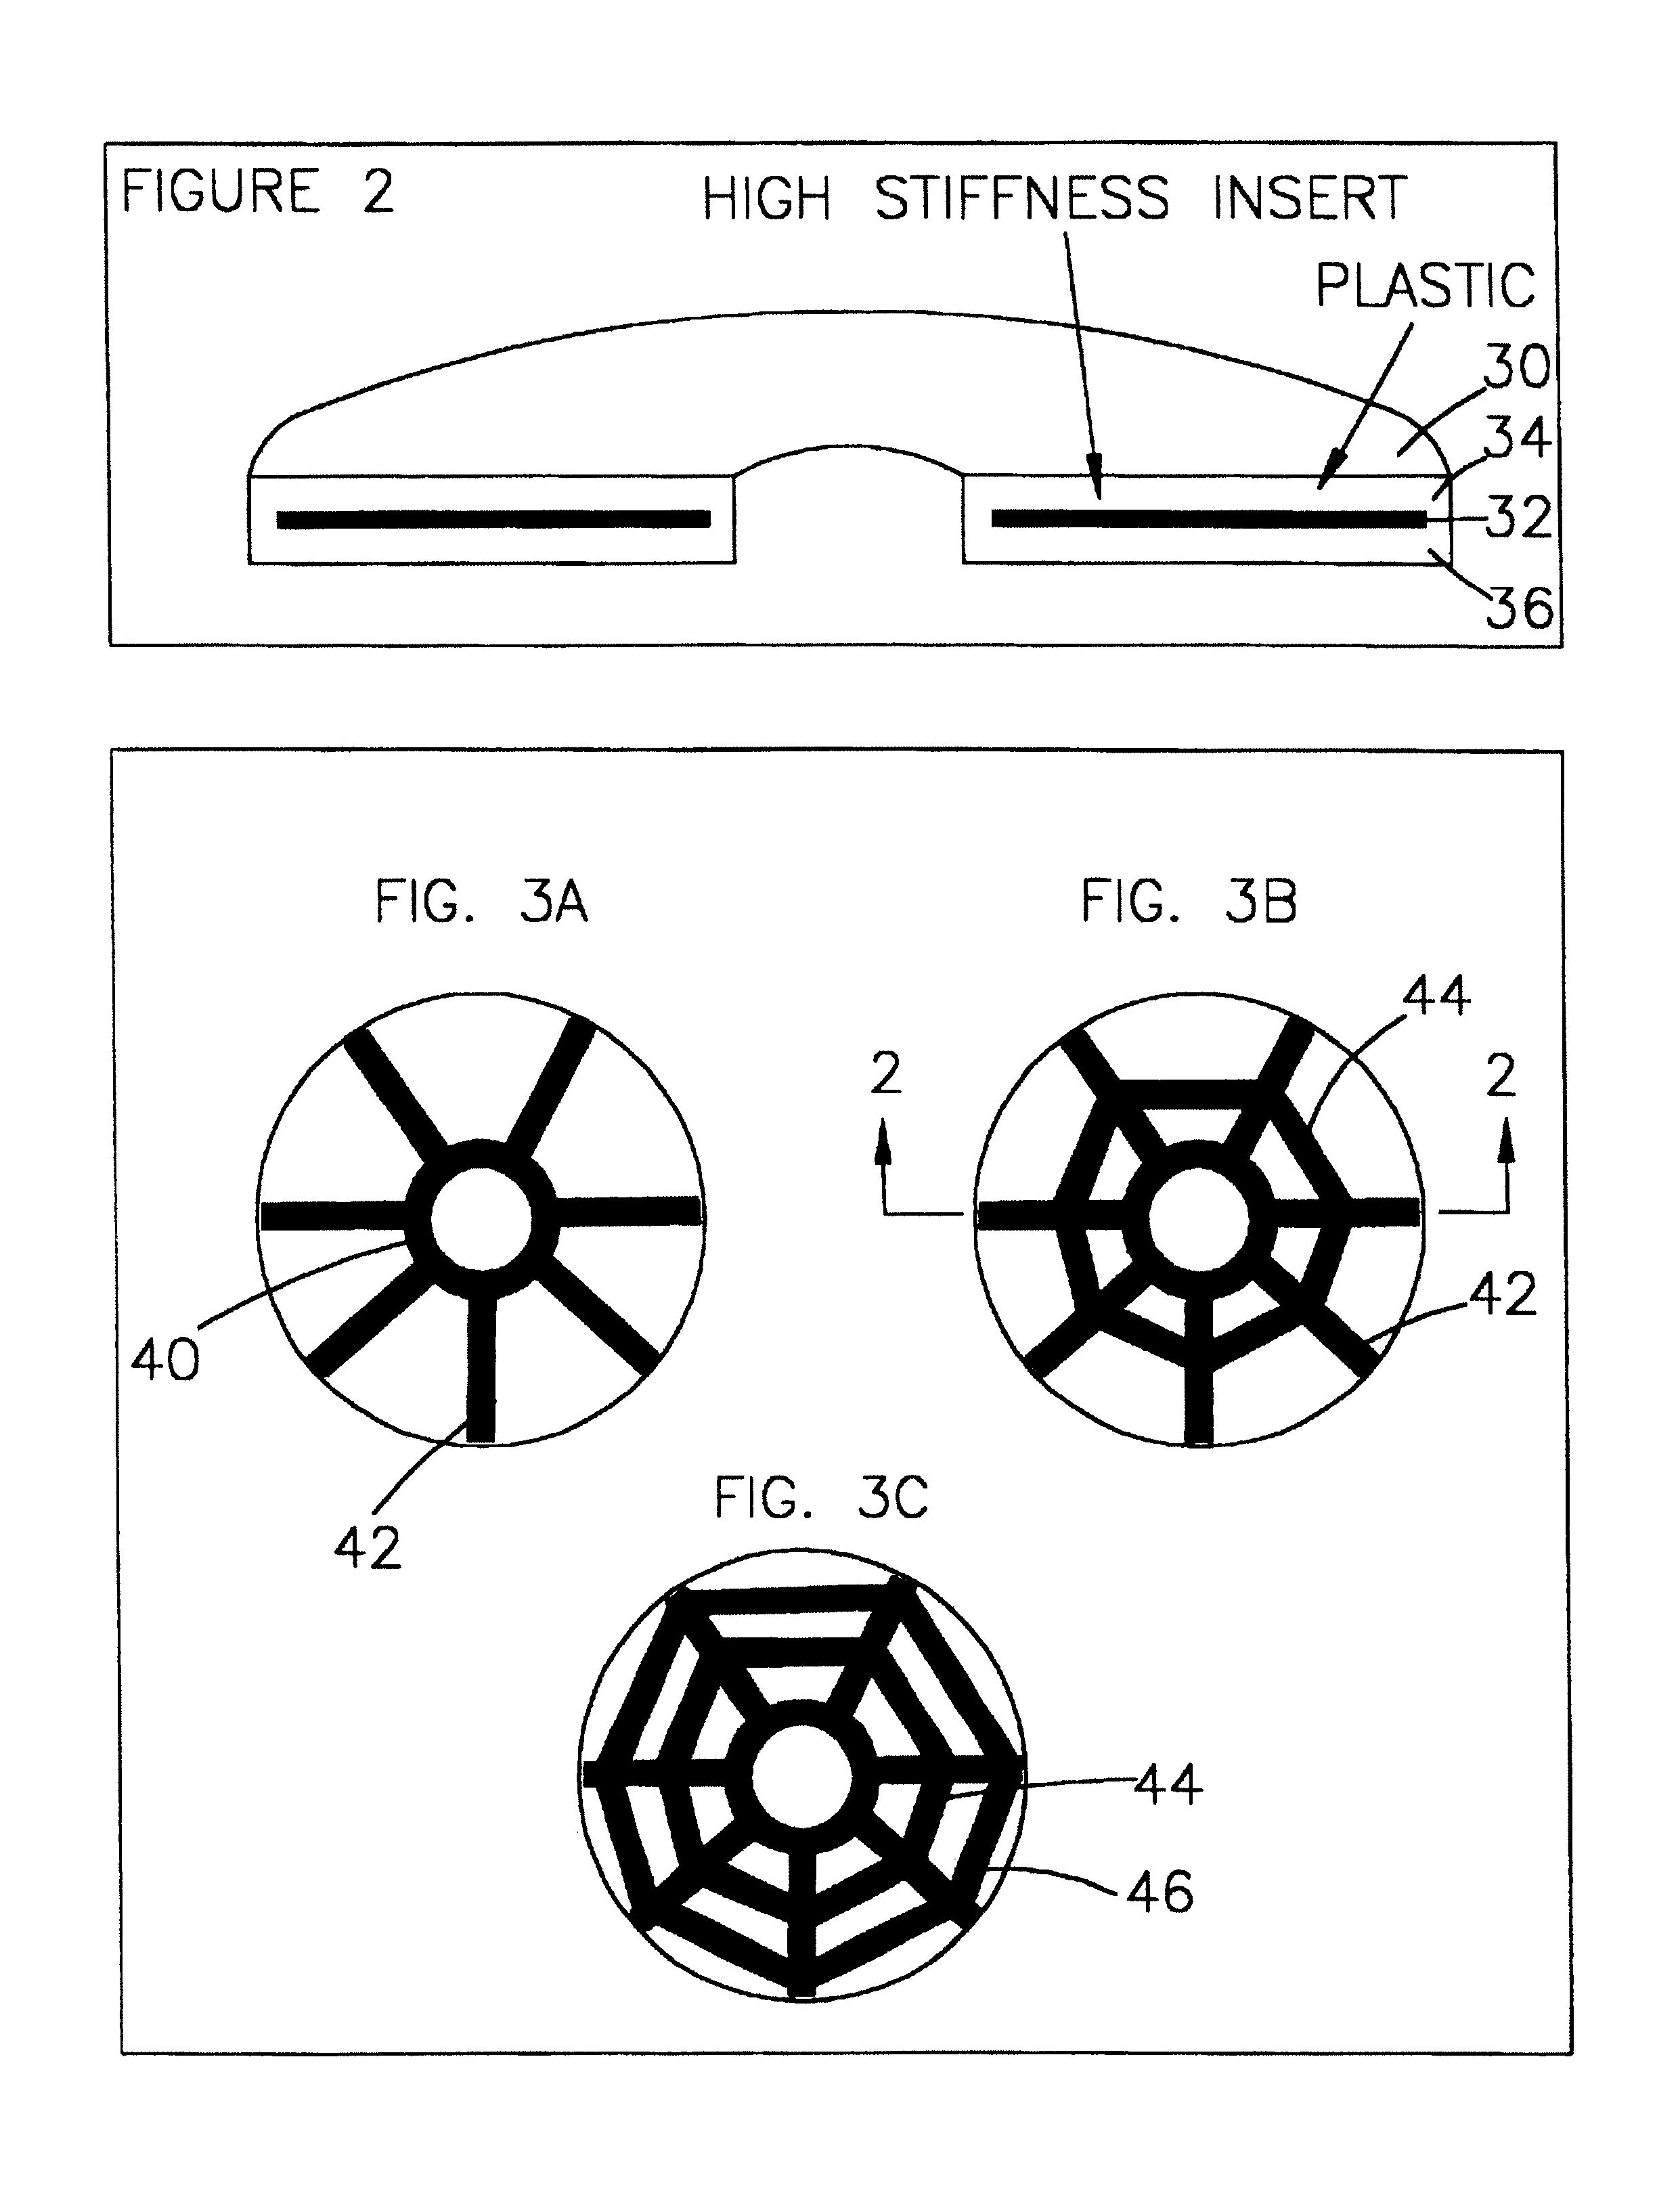 Design of a rigid disc plastic substrate with high stiffness insert